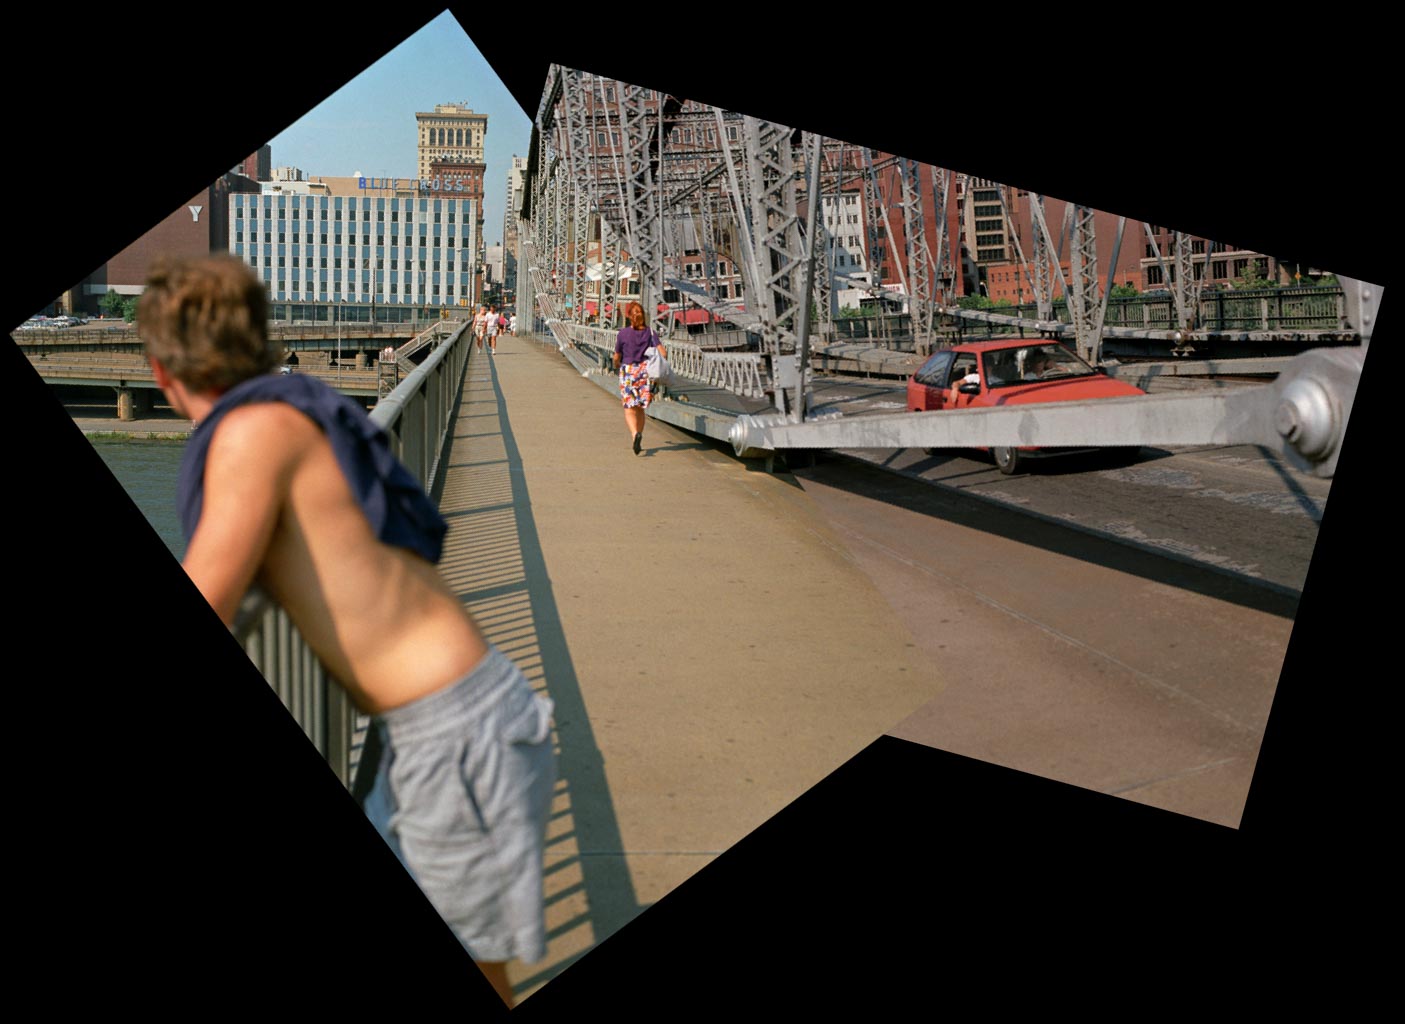 "Man on the Smithfield Bridge" Pittsburgh, Pennsylvania, Retinal Memories Series  1994, Contemporary Art Photography,  Sequence Photography, Color Film Photography